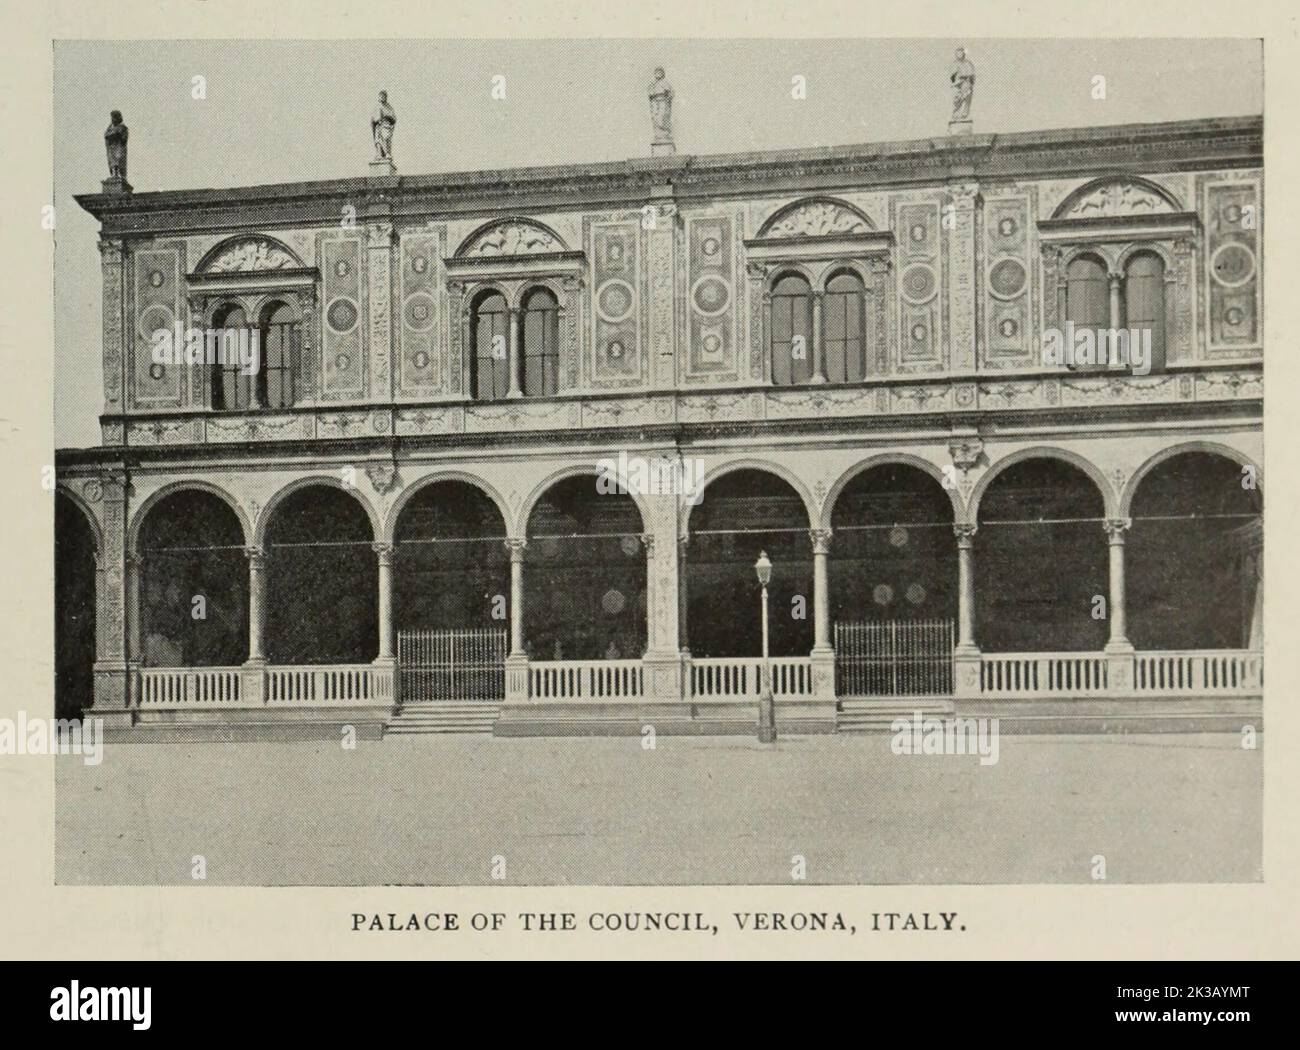 PALACE OF THE COUNCIL, VERONA, ITALY from the Article THE ARCHITECTURE OF MUNICIPAL BUILDINGS. By E. C. Gardner from The Engineering Magazine DEVOTED TO INDUSTRIAL PROGRESS Volume VIII April to September, 1895 NEW YORK The Engineering Magazine Co Stock Photo